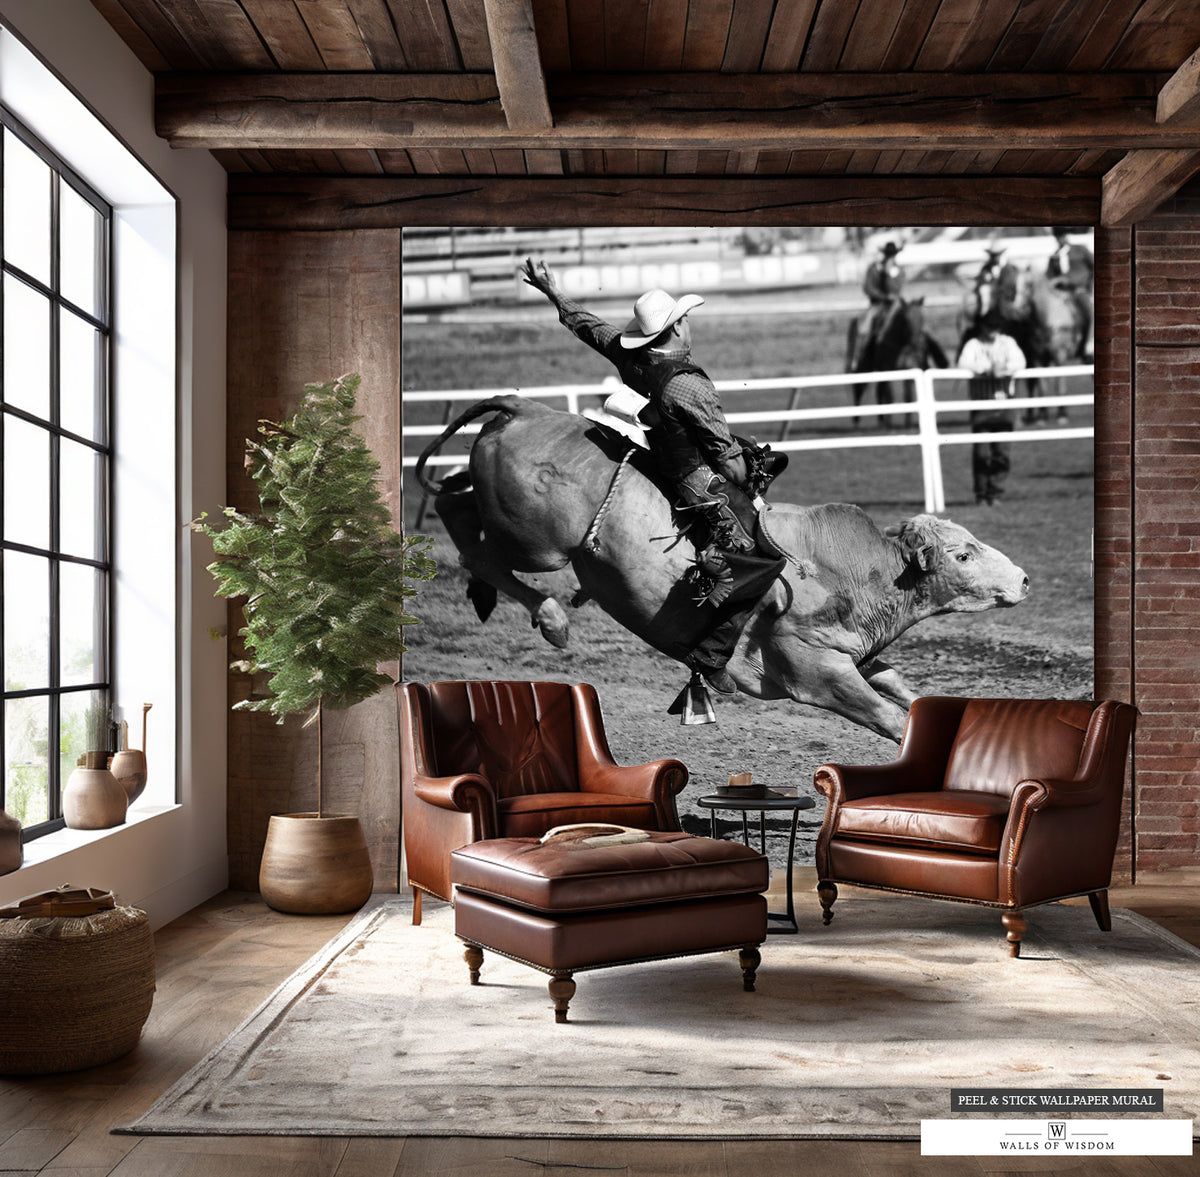 Western decor bull riding rodeo photo mural, perfect for statement walls.